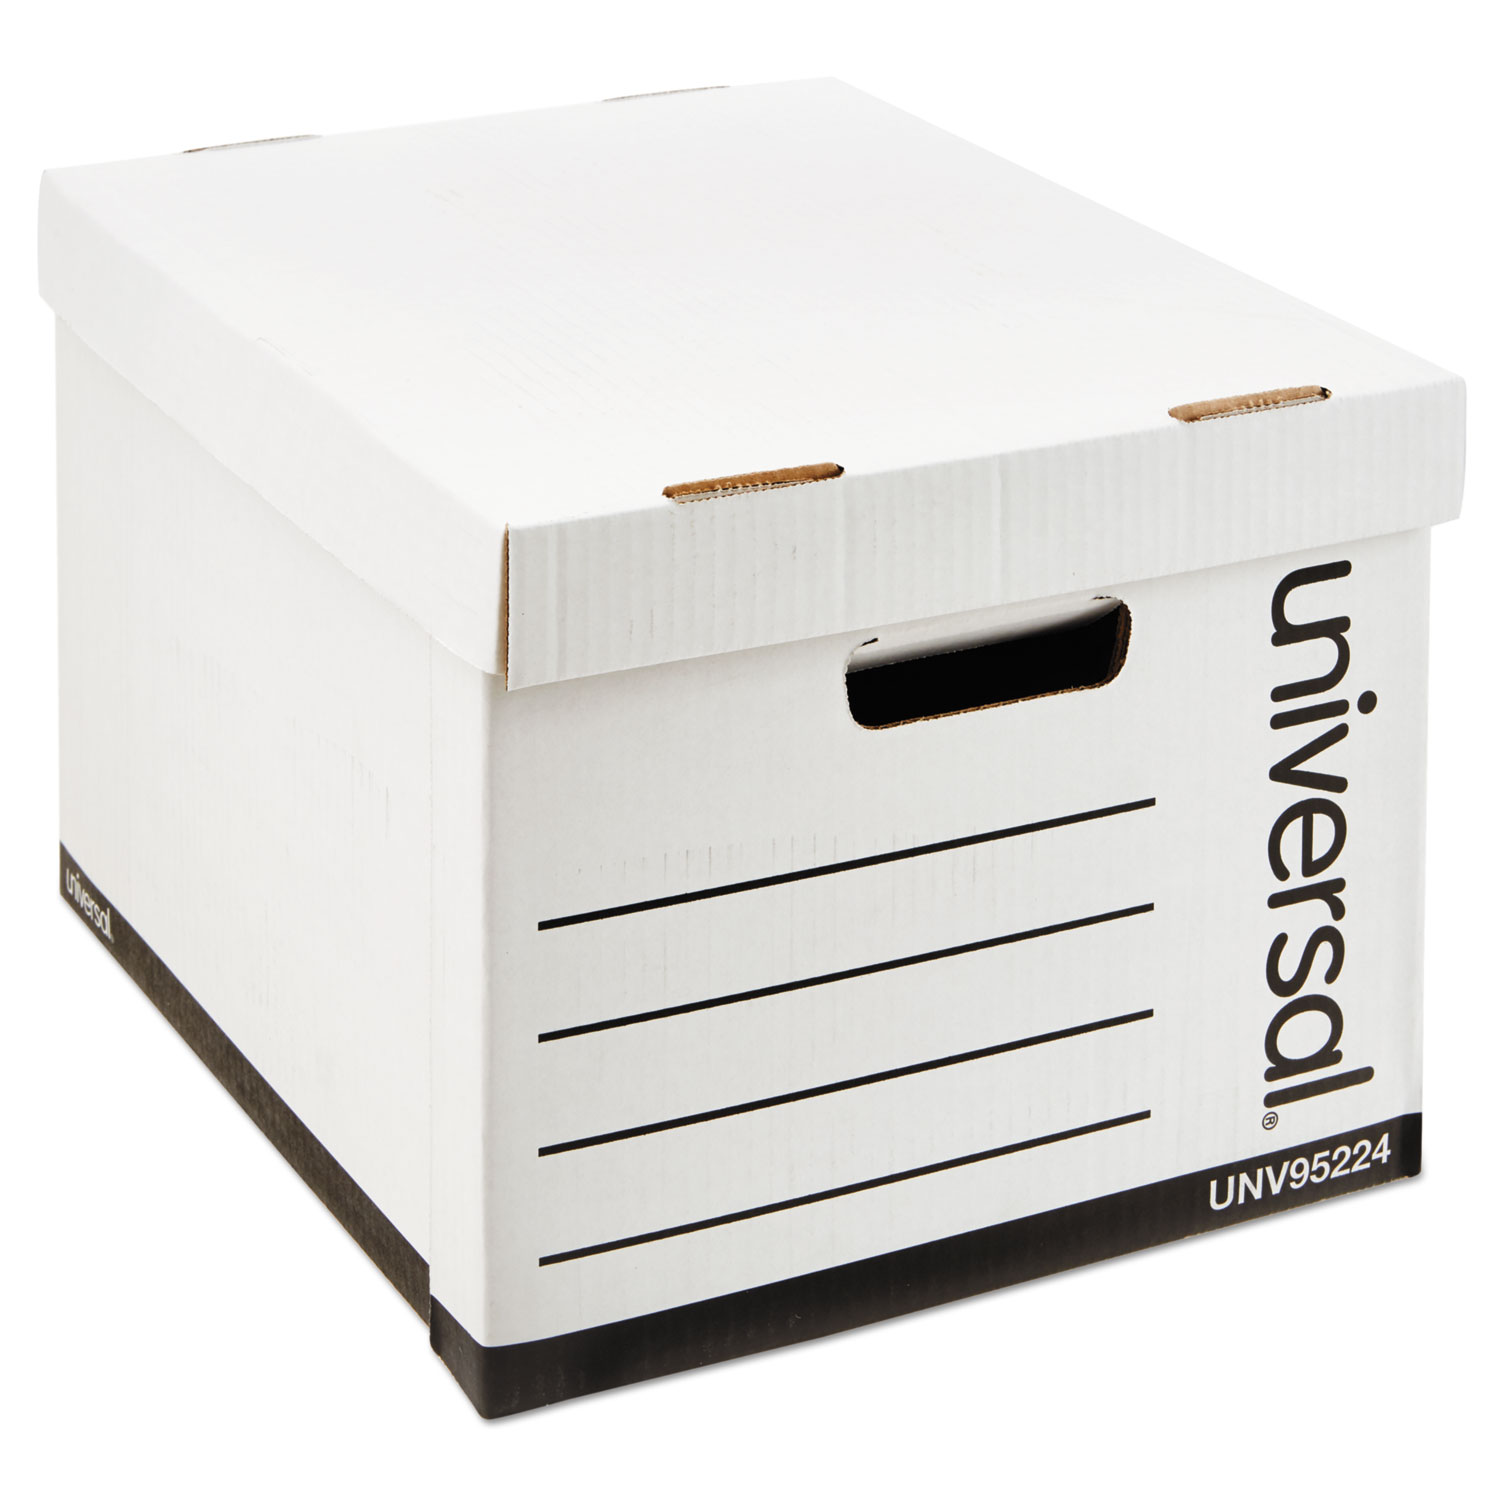  Universal 9522403 Heavy-Duty Fast Assembly Lift-Off Lid Storage Box, Letter/Legal Files, White, 12/Carton (UNV95224) 